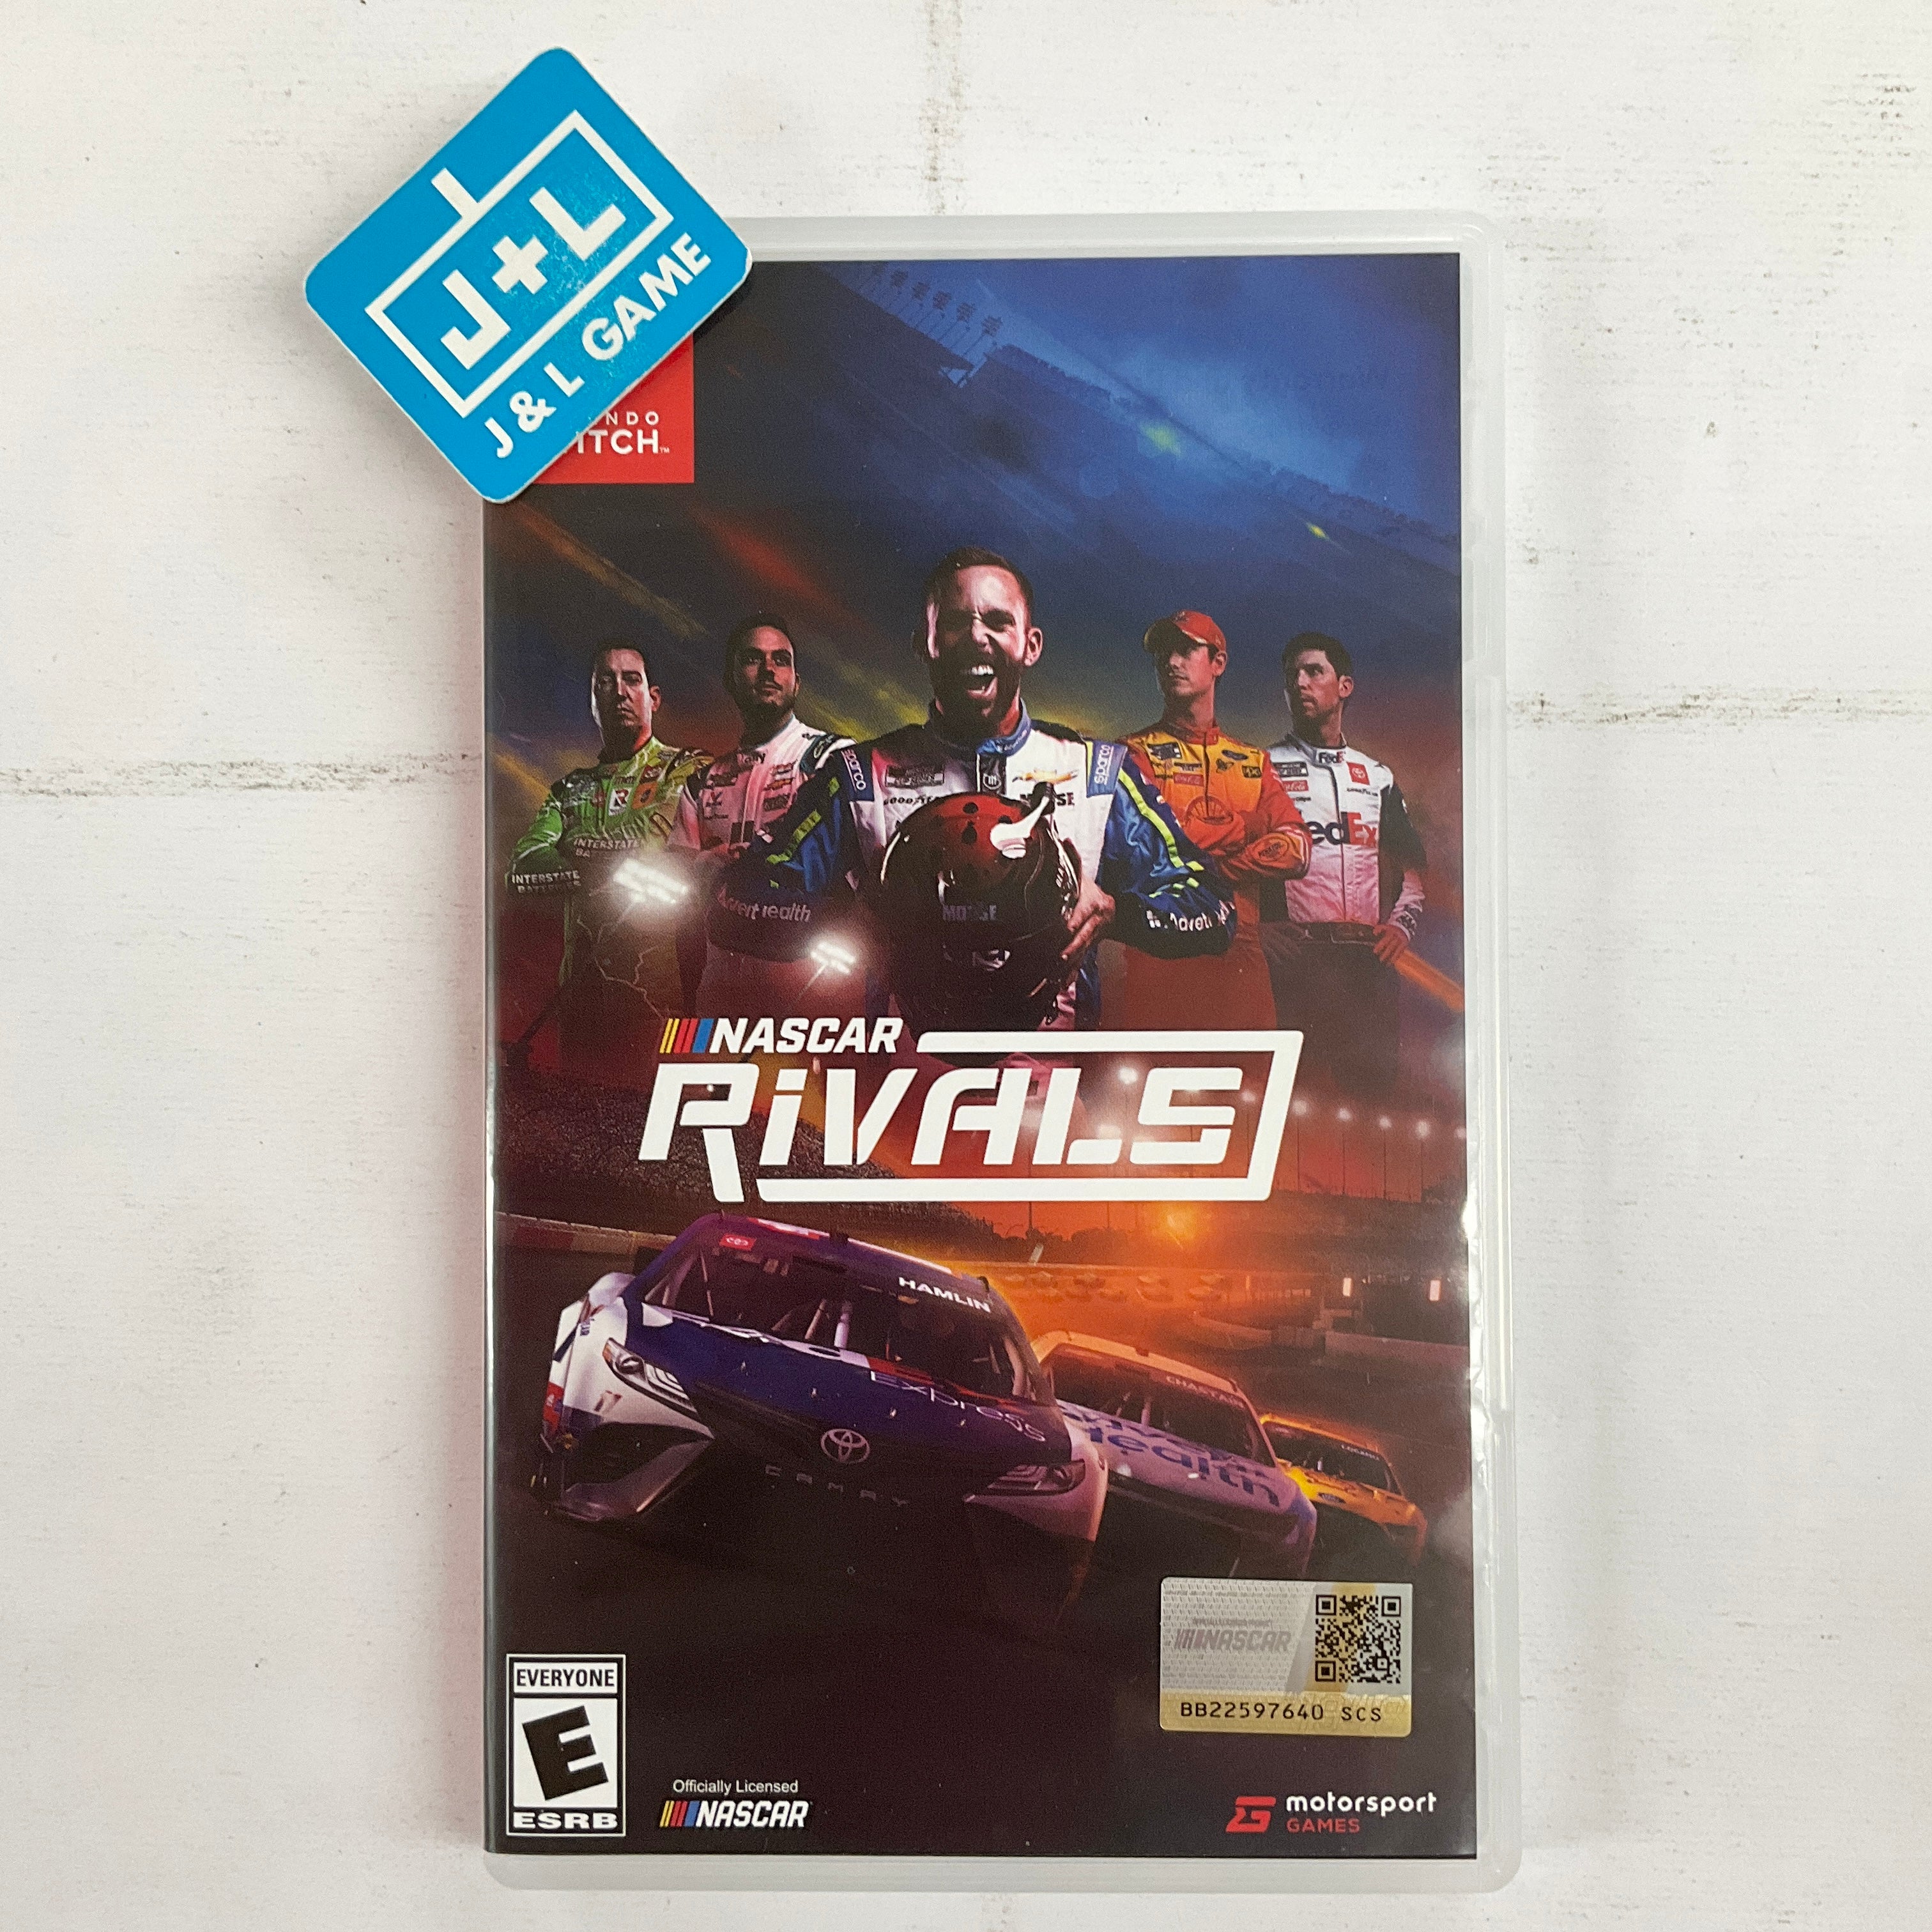 NASCAR Rivals - (NSW) Nintendo Switch [UNBOXING] Video Games Motorsport Games   